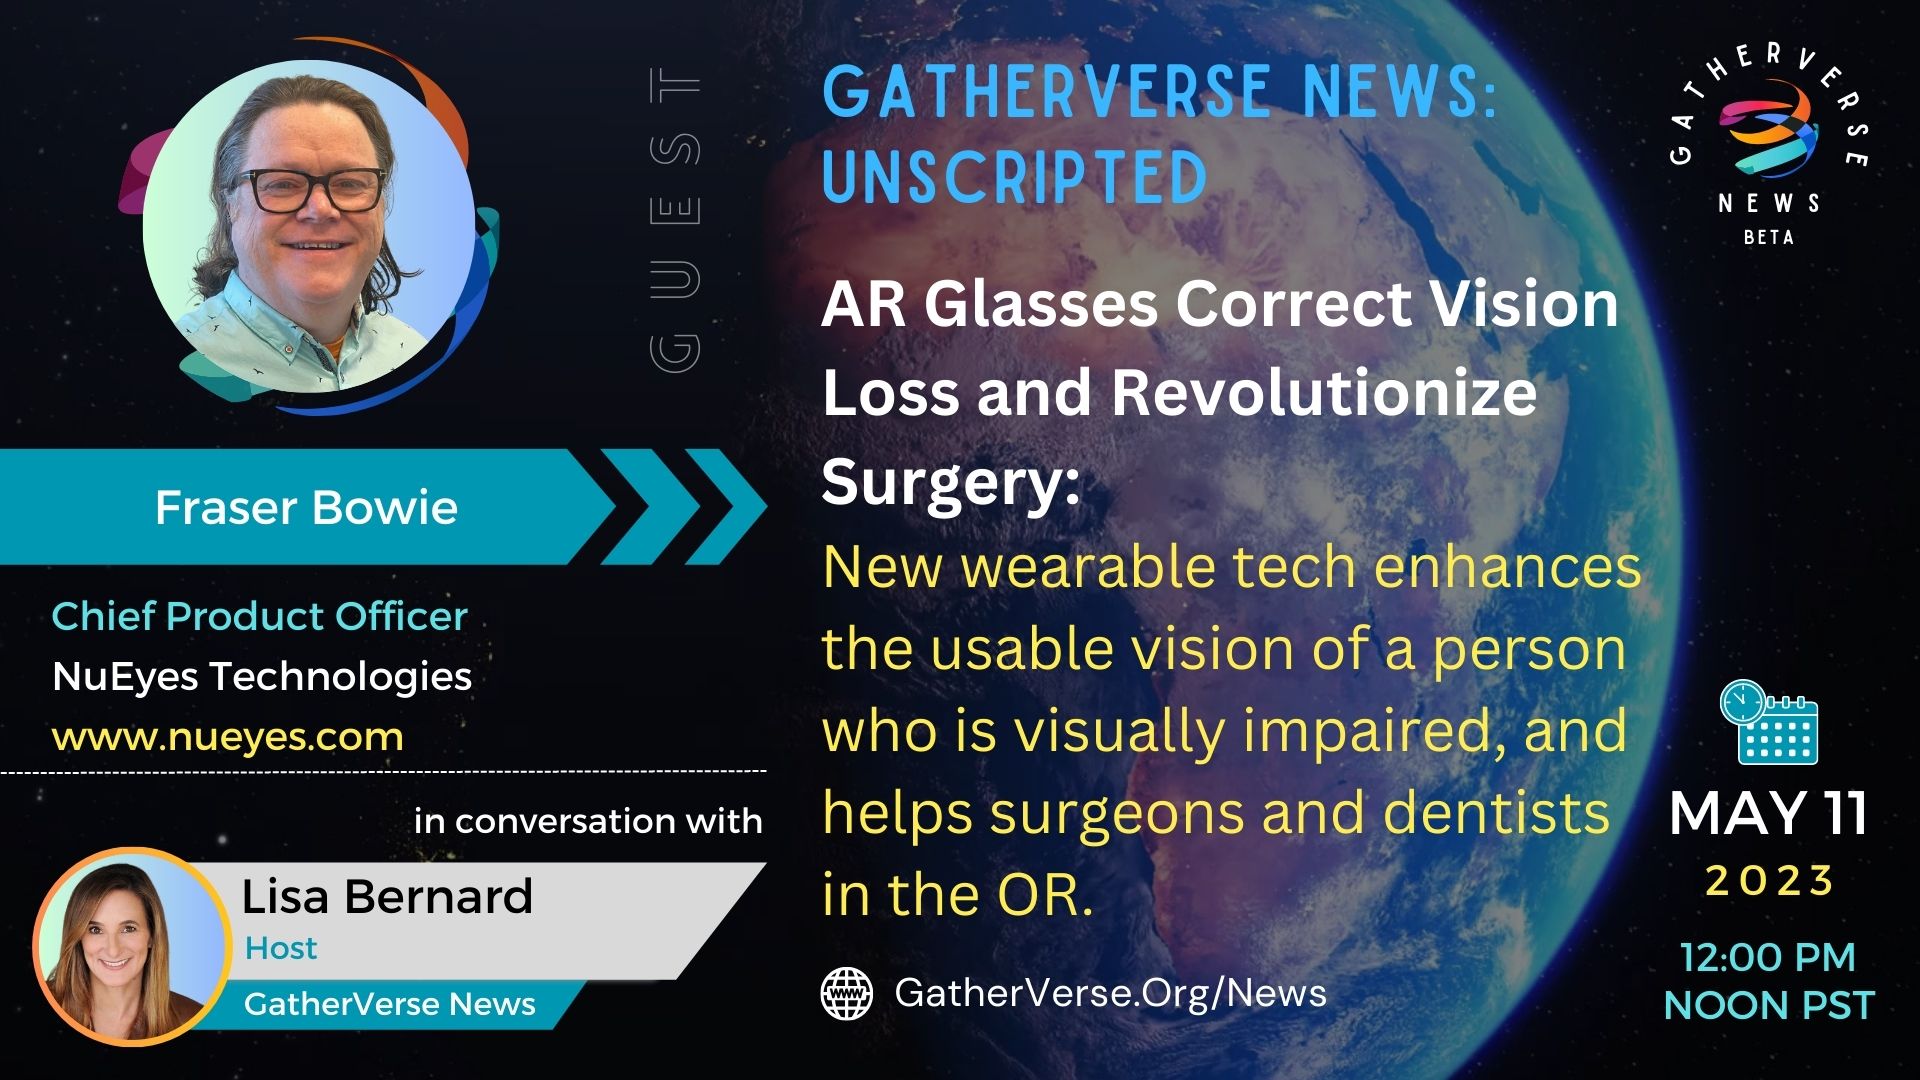 GVN Unscripted - AR Glasses Correct Vision Loss and Revolutionize Surgery